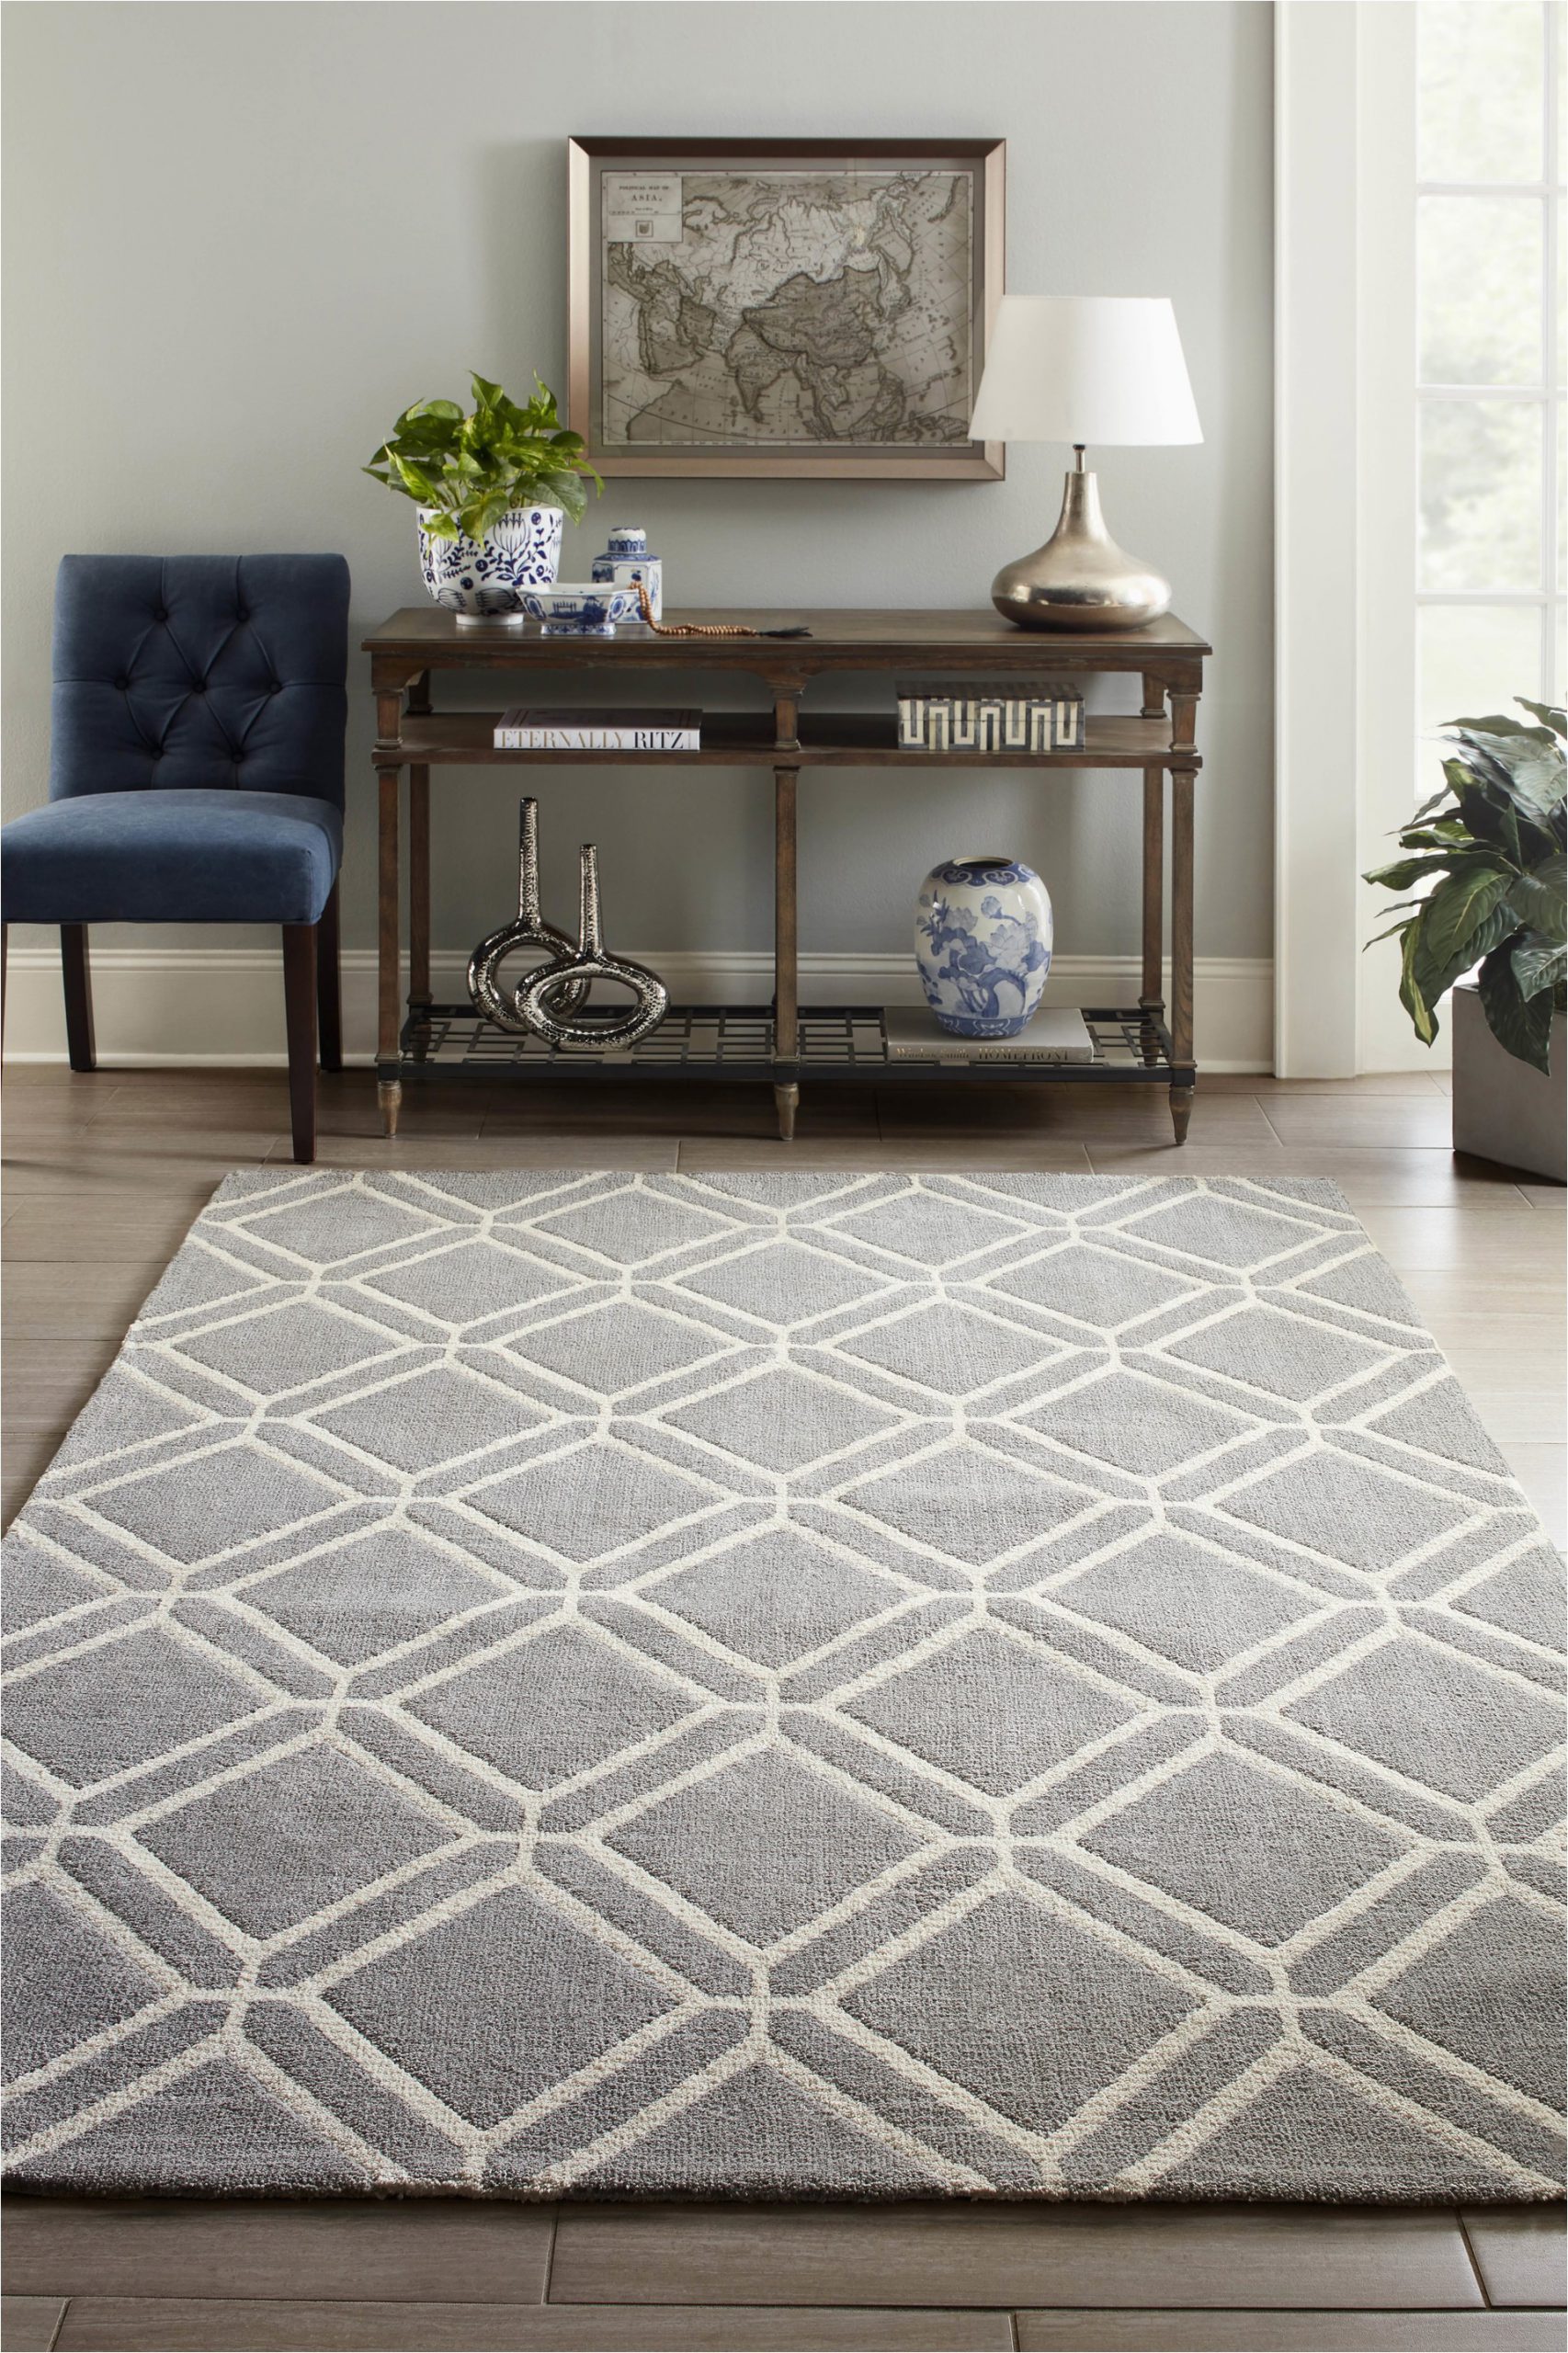 Allen Roth area Rugs at Lowes Allen Roth Shae 8 X 10 Grey Indoor Geometric Mid Century Modern area Rug